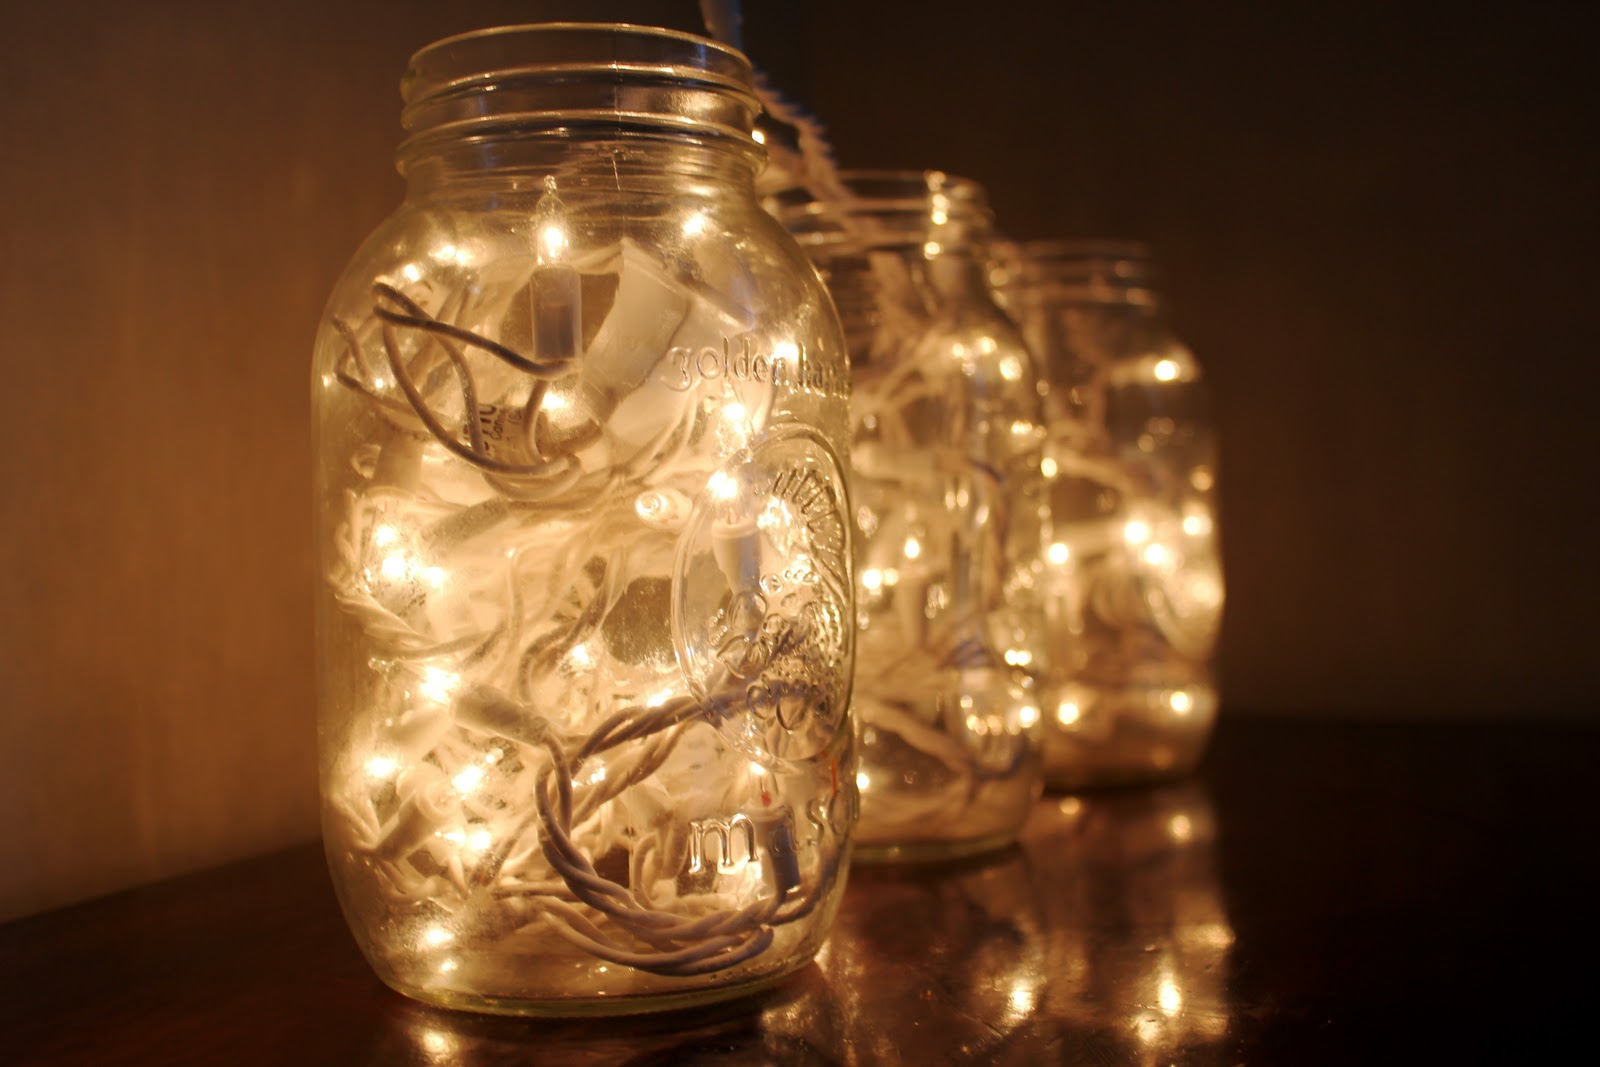 40 Christmas Light Decorations In A Jar All About Christmas within sizing 1600 X 1067